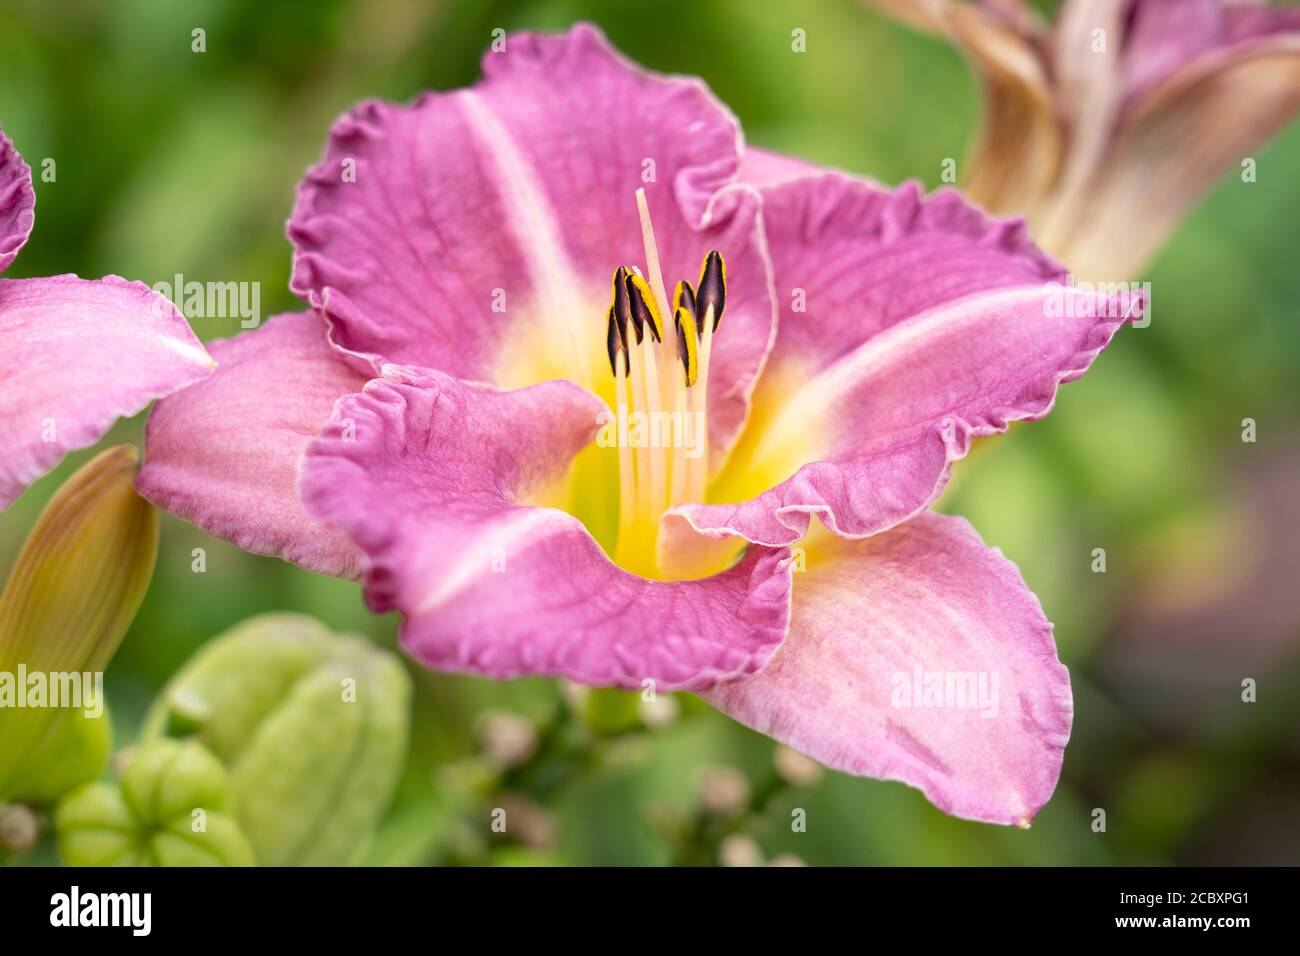 Pink flowers of the daylily 'Lavender Dew' (Hemerocallis), a member of the family Asphodelaceae, growing in Lower Austria Stock Photo